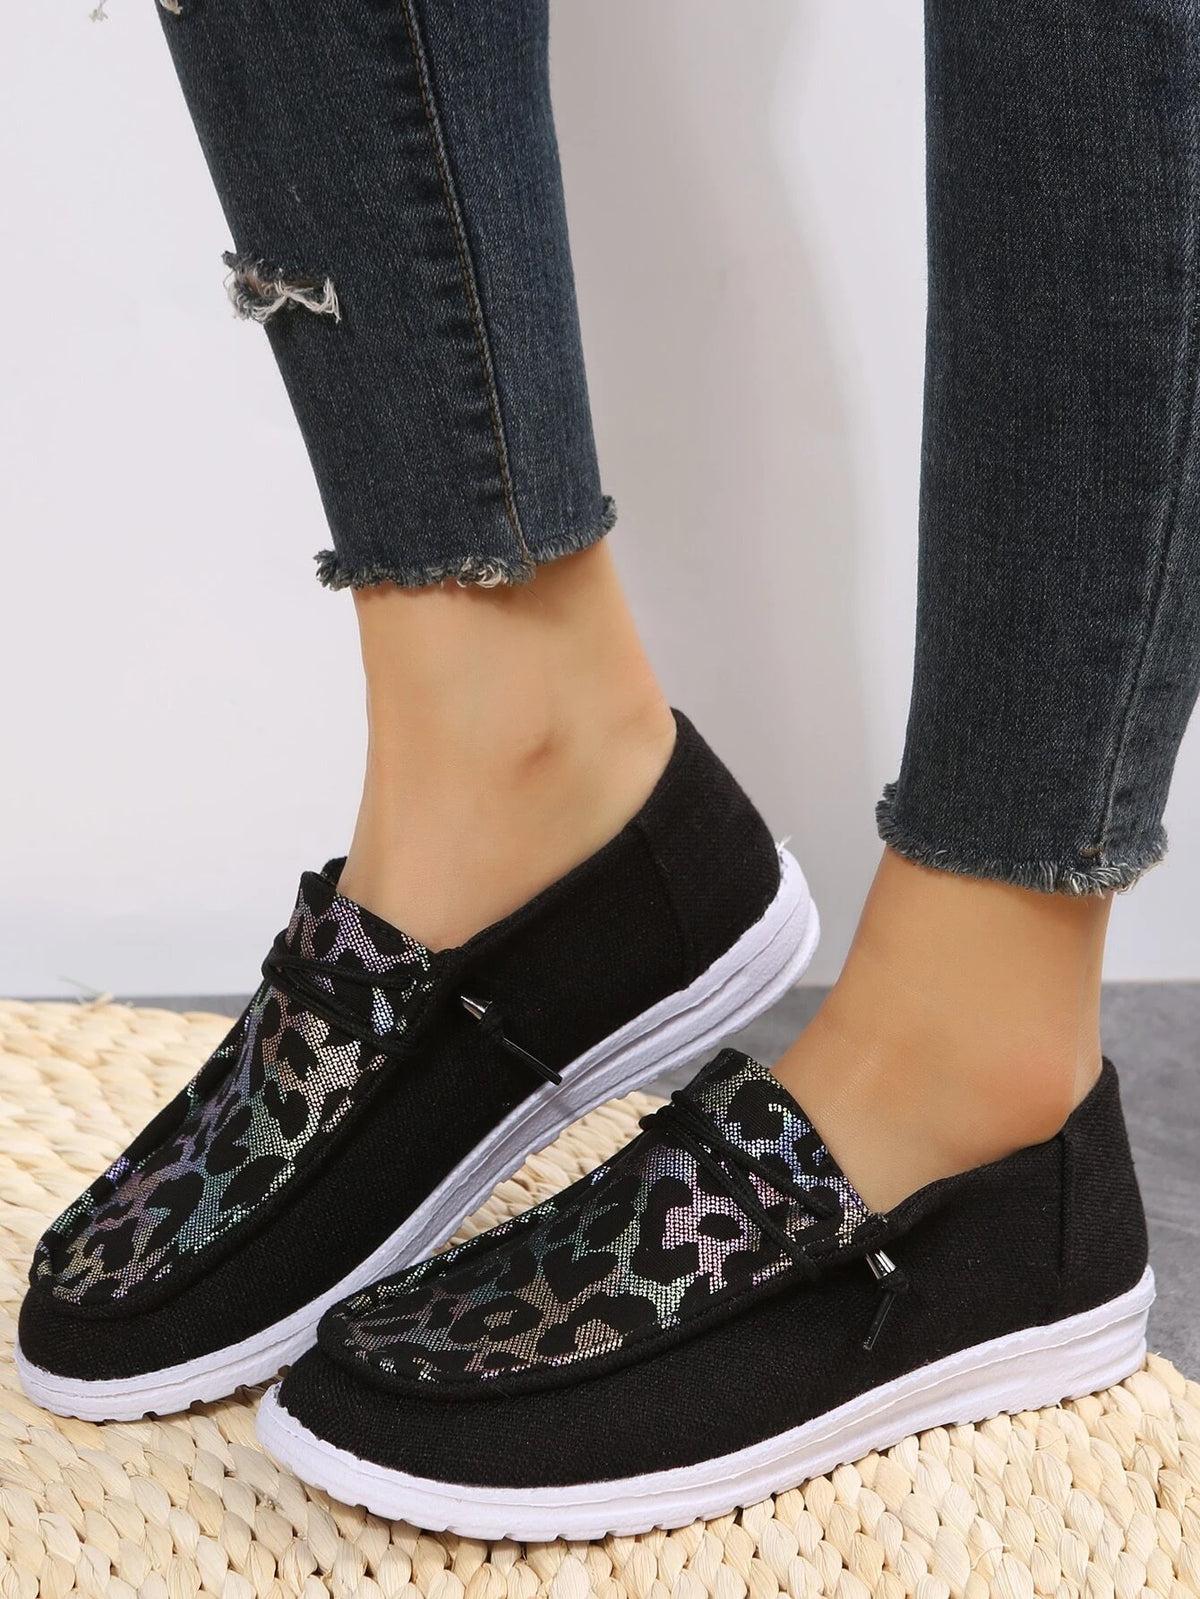 Women Leopard Pattern Lace-up Design Casual Shoes, Sporty Outdoor Canvas Shoes